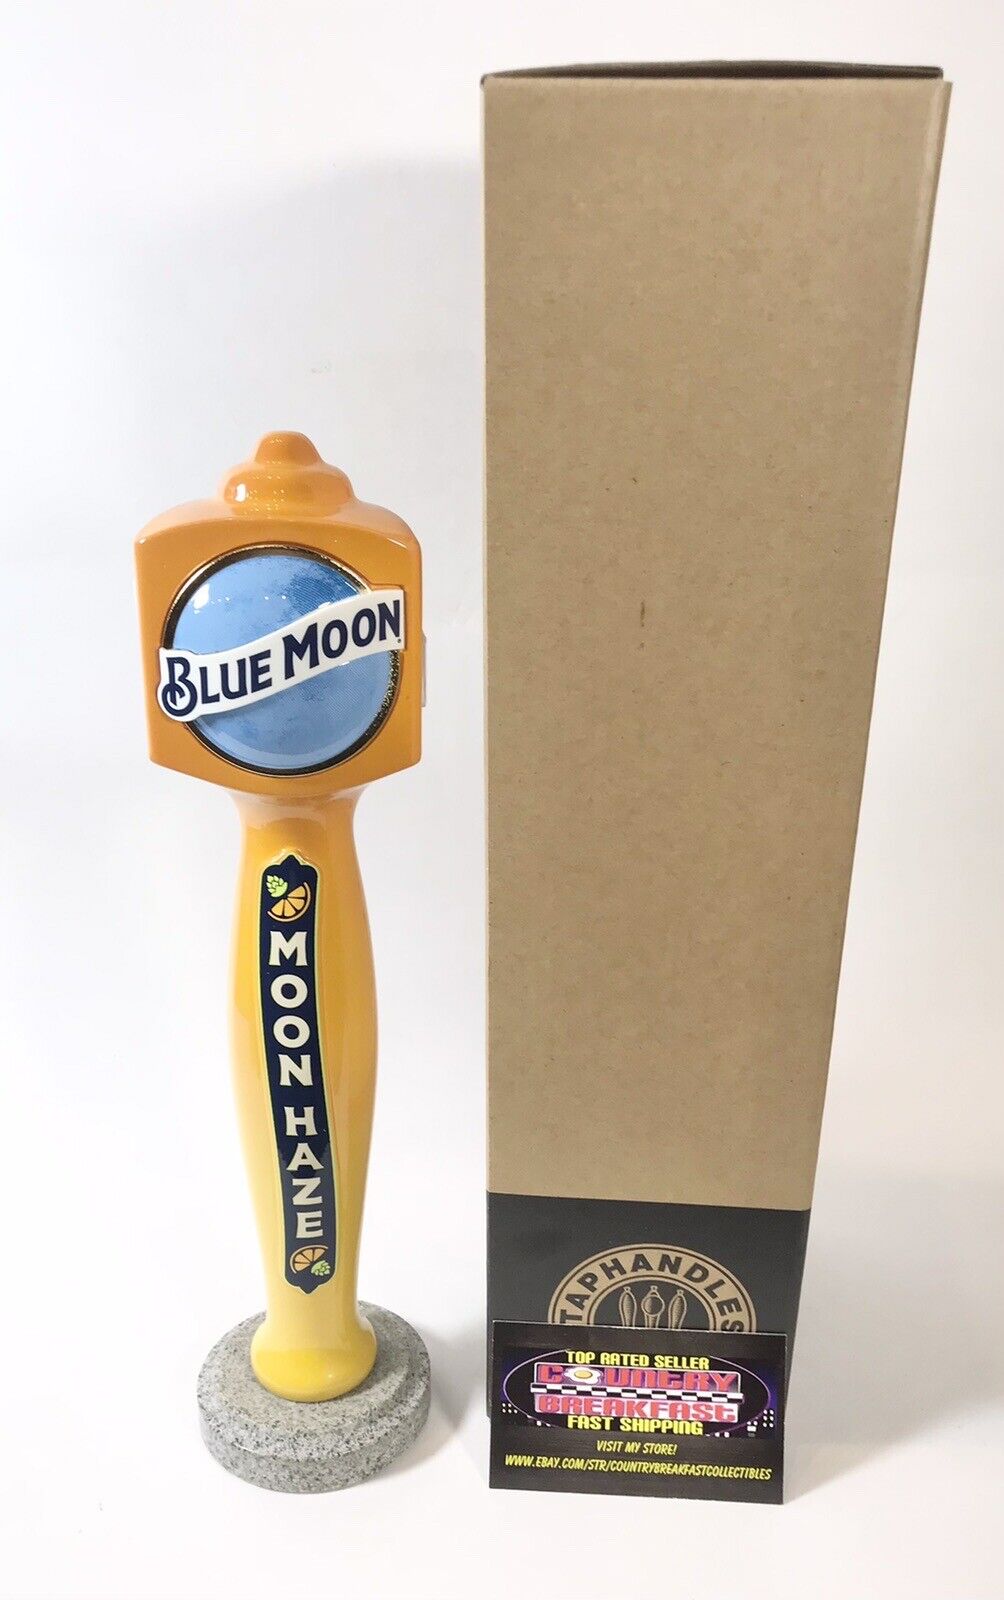 Blue Moon Belgian White Moon Haze Beer Tap Handle 11.5” Tall - Brand New In Box